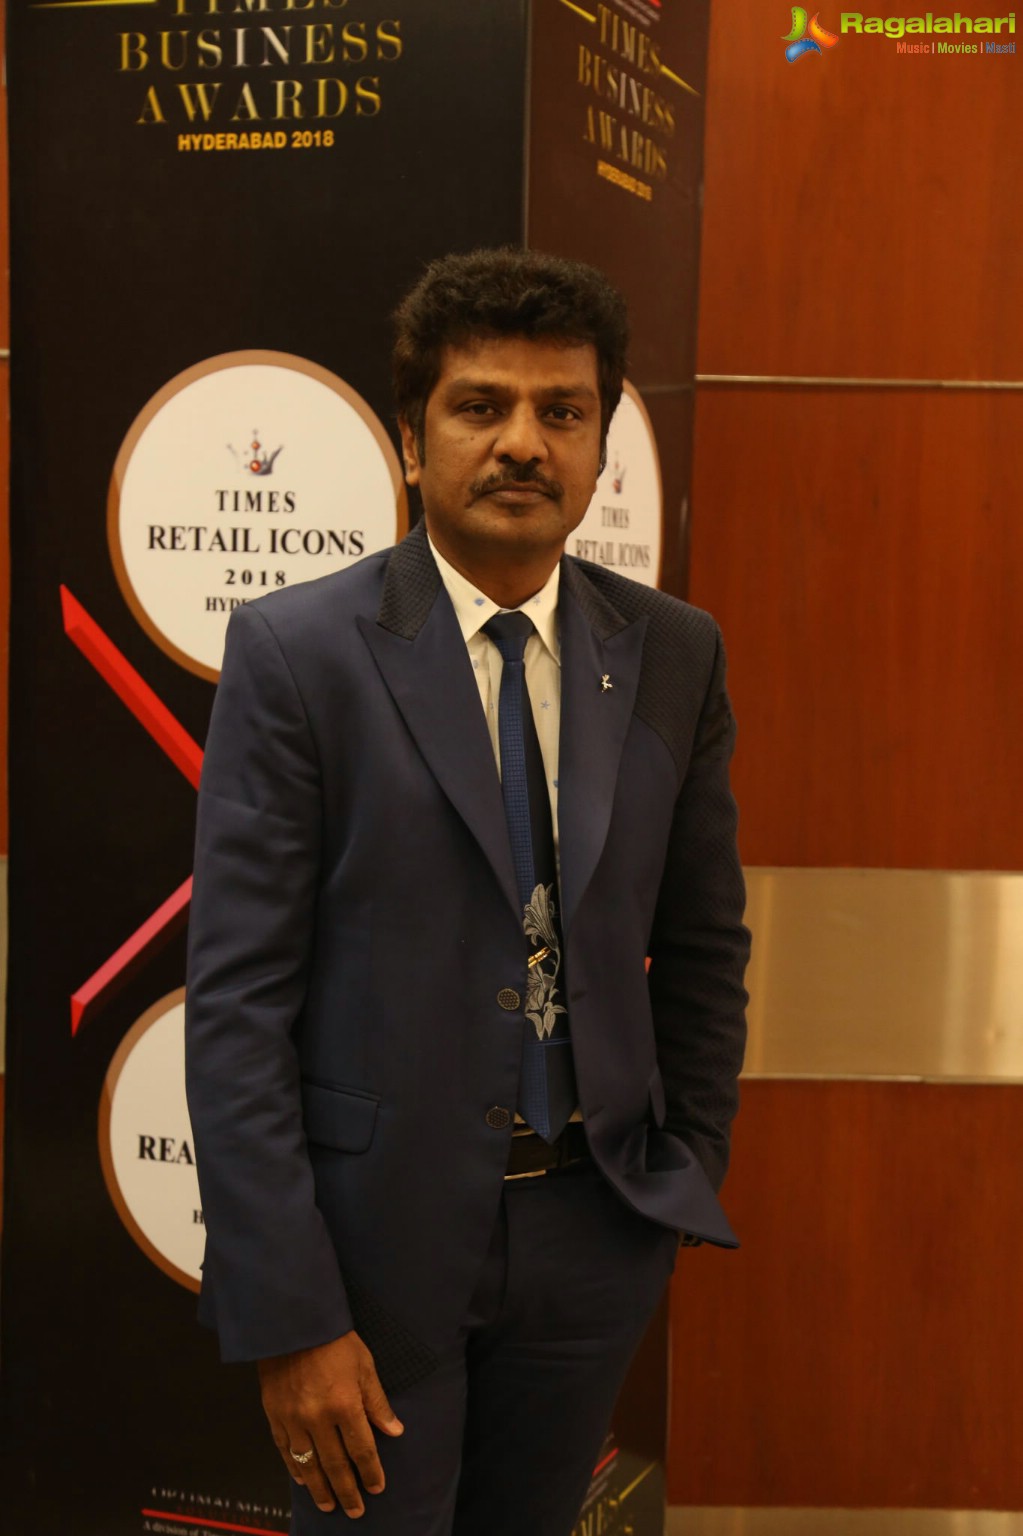 Times Business Awards 2018 at HICC